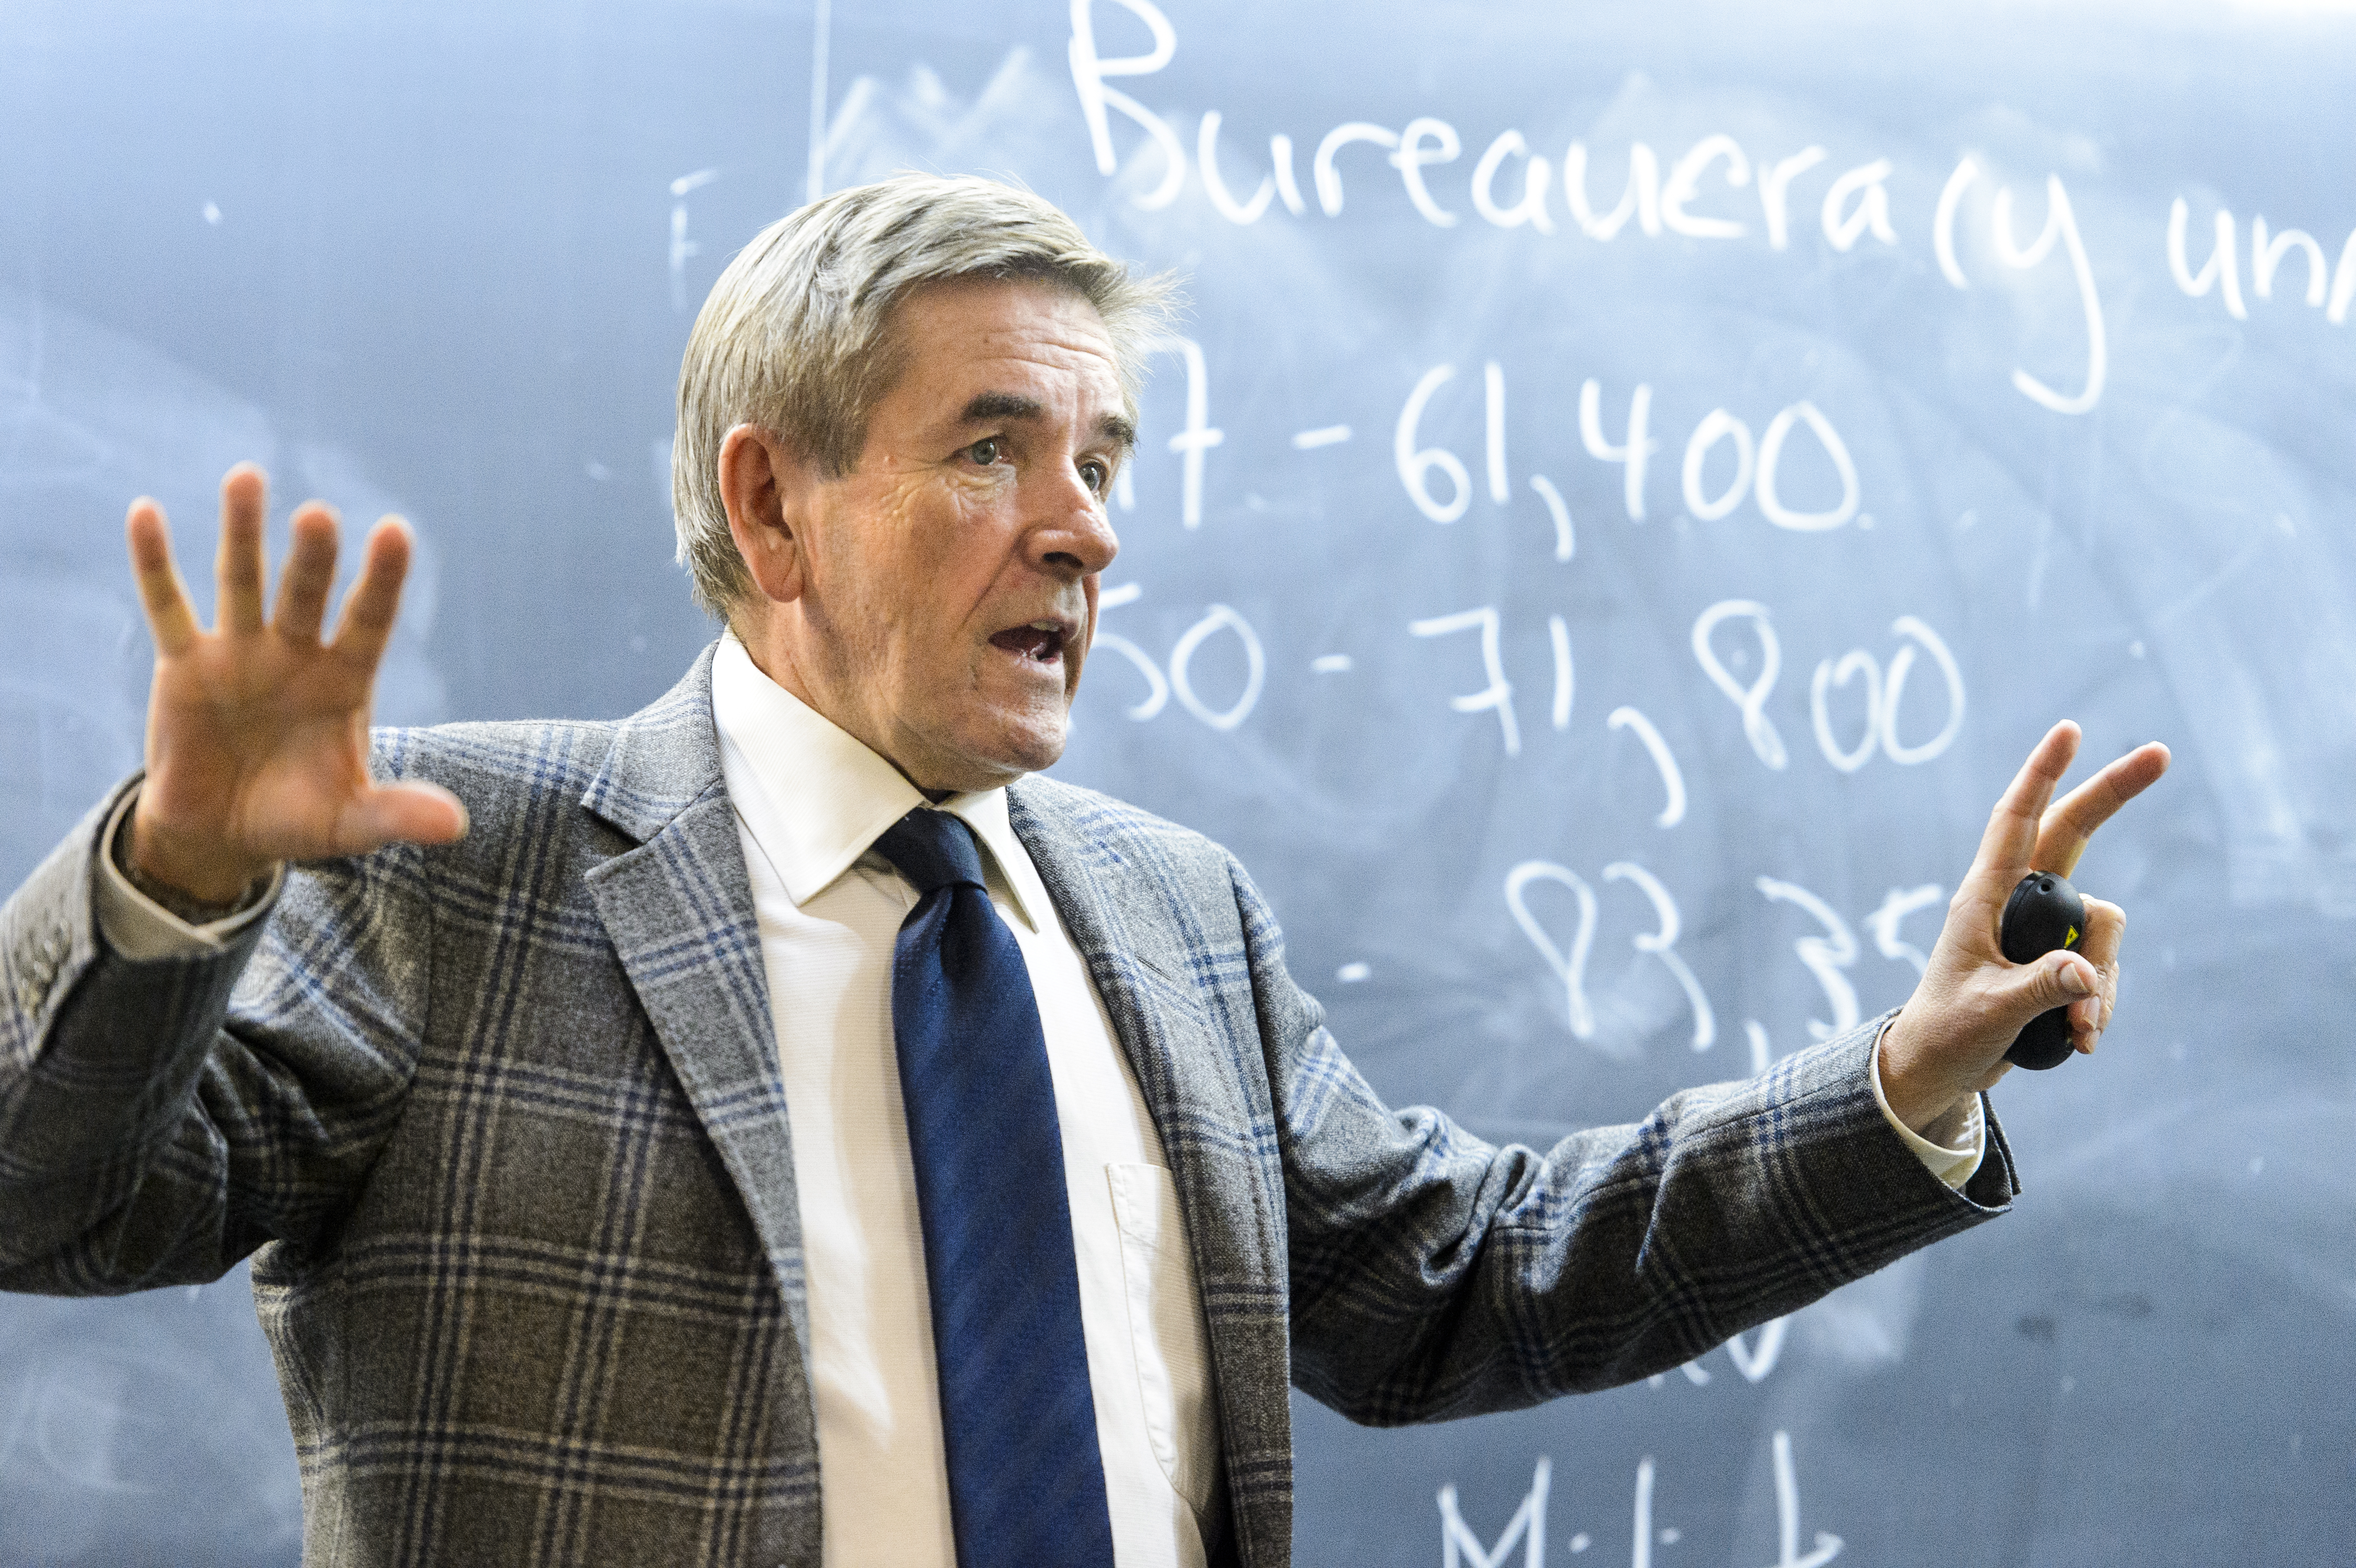 David McDonald, a white man wearing a patterned tweed blazer and blue tie, gestures in front of a chalkboard.